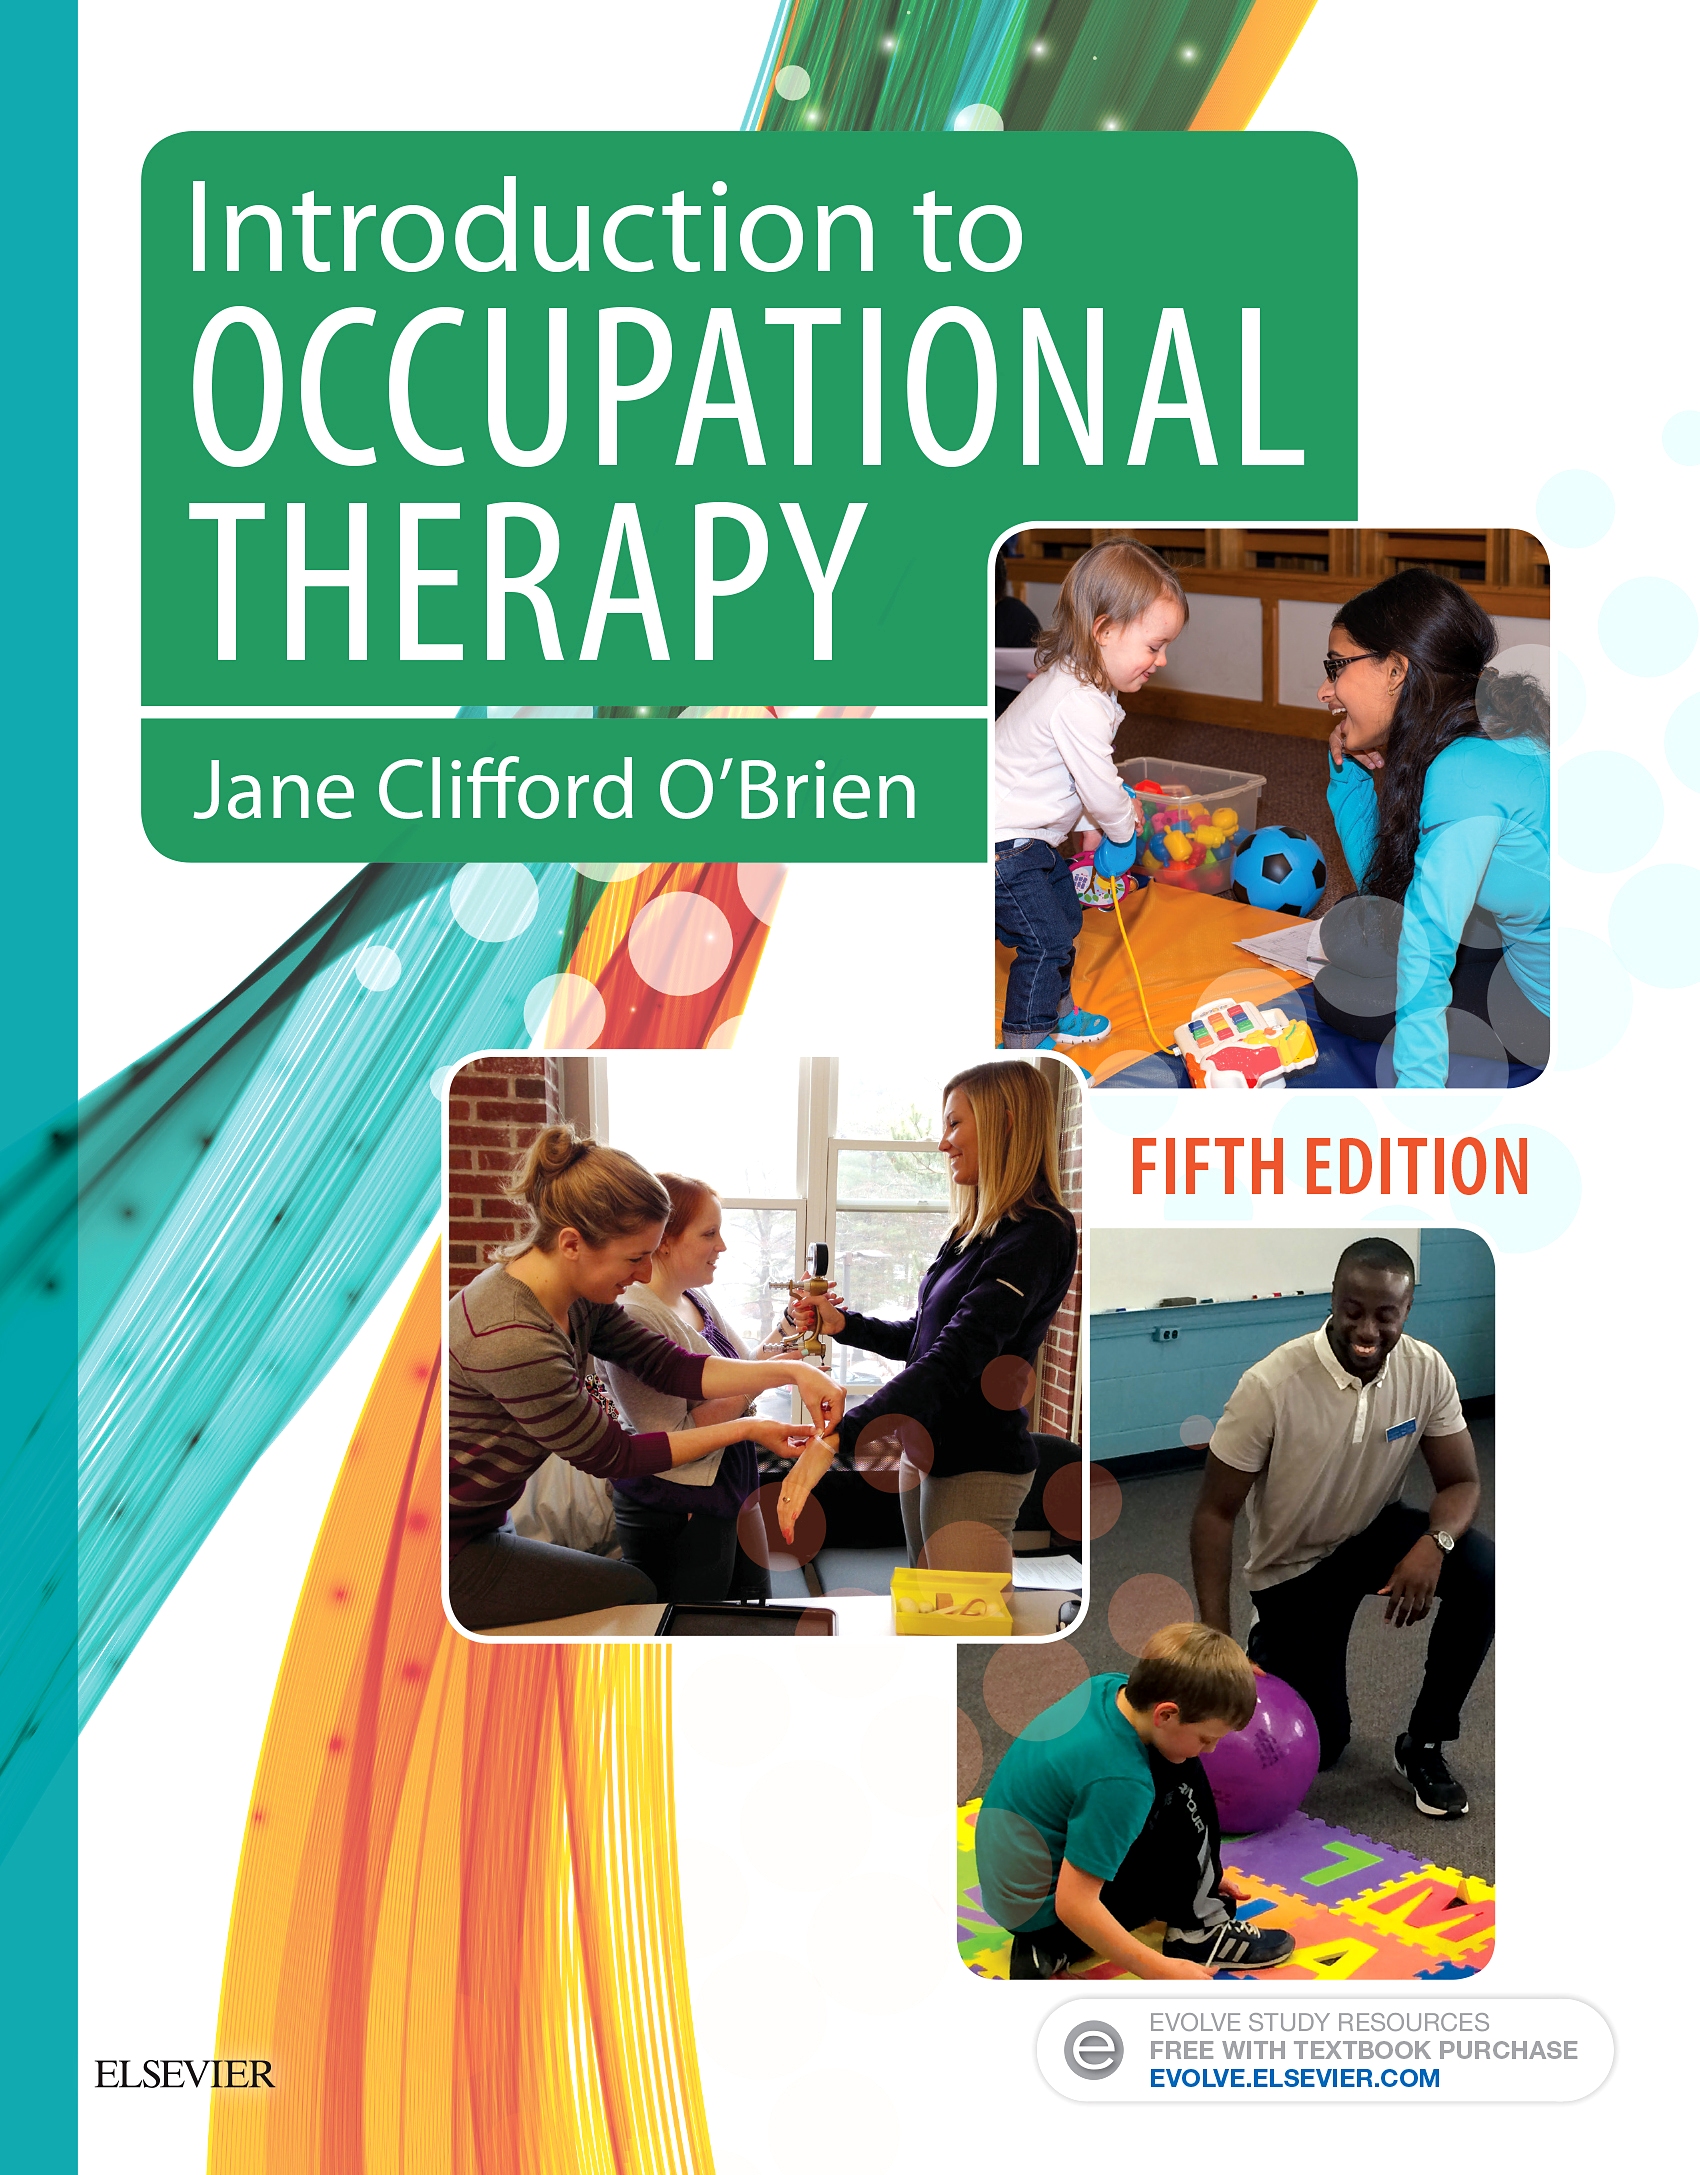 Evolve Resources for Introduction to Occupational Therapy, 5th Edition